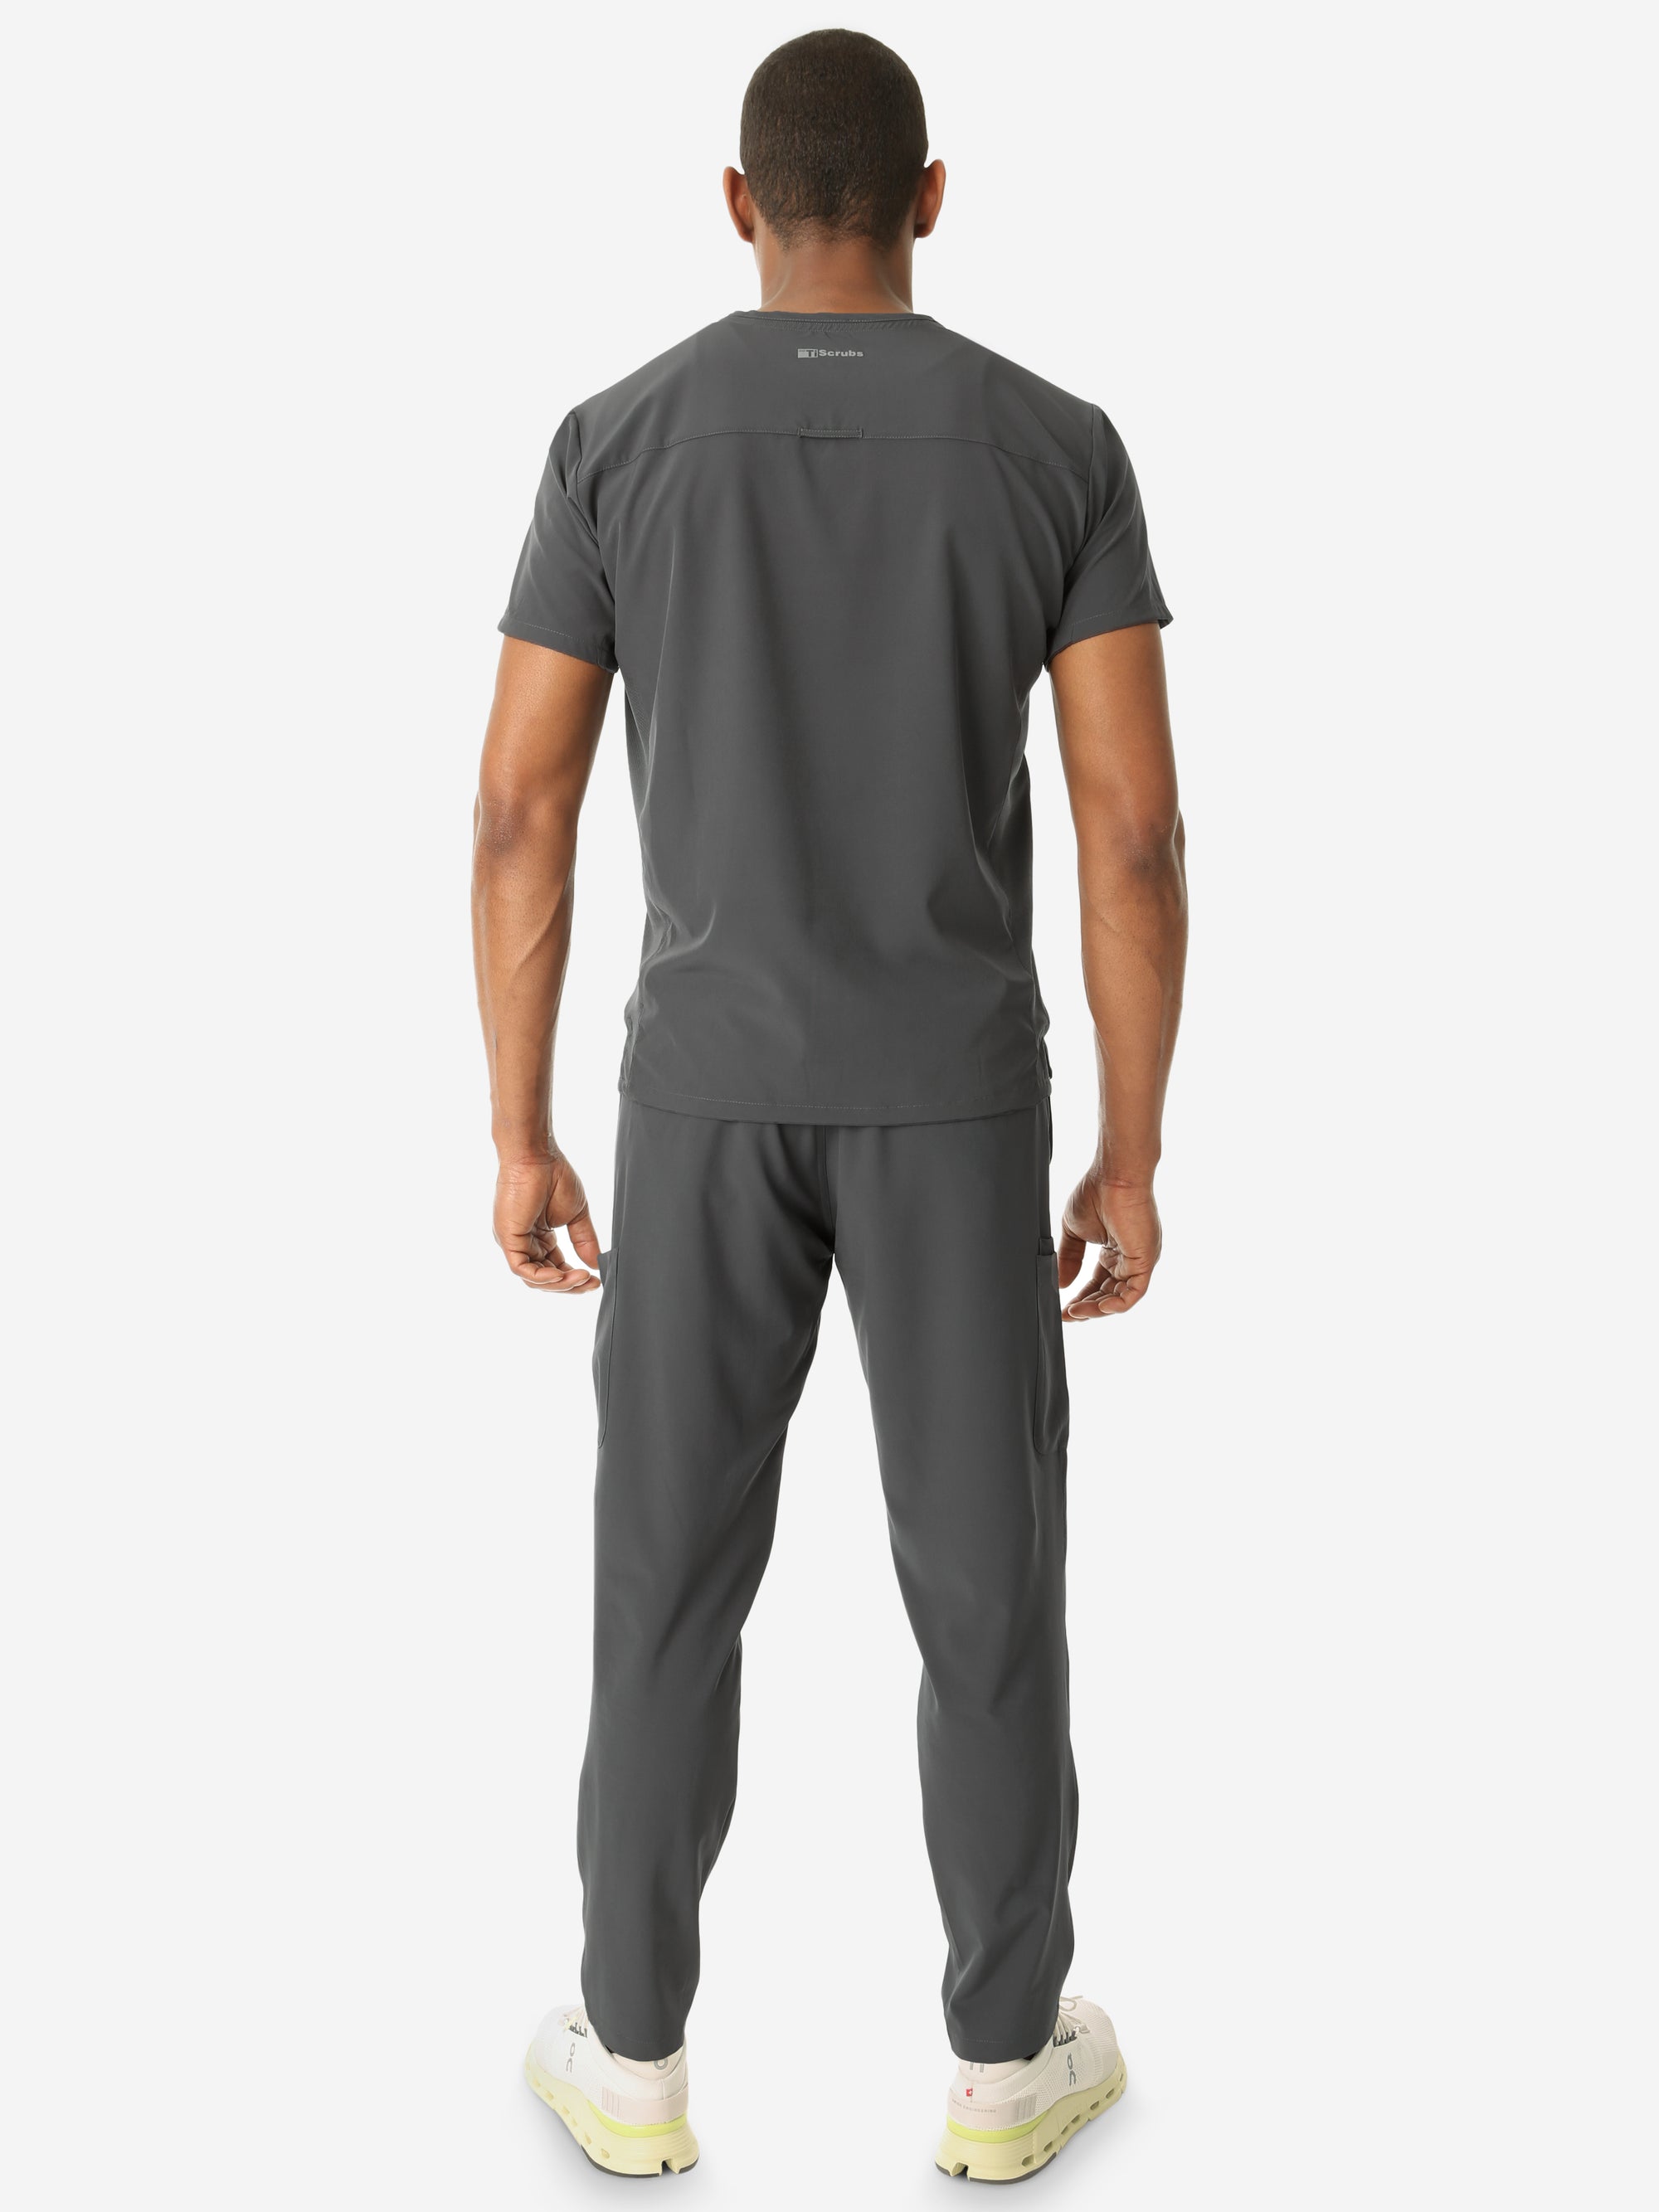 Men&#39;s Double Pocket Scrub Top Untucked Charcoal Gray Full Body Back View with 9-Pocket Pants